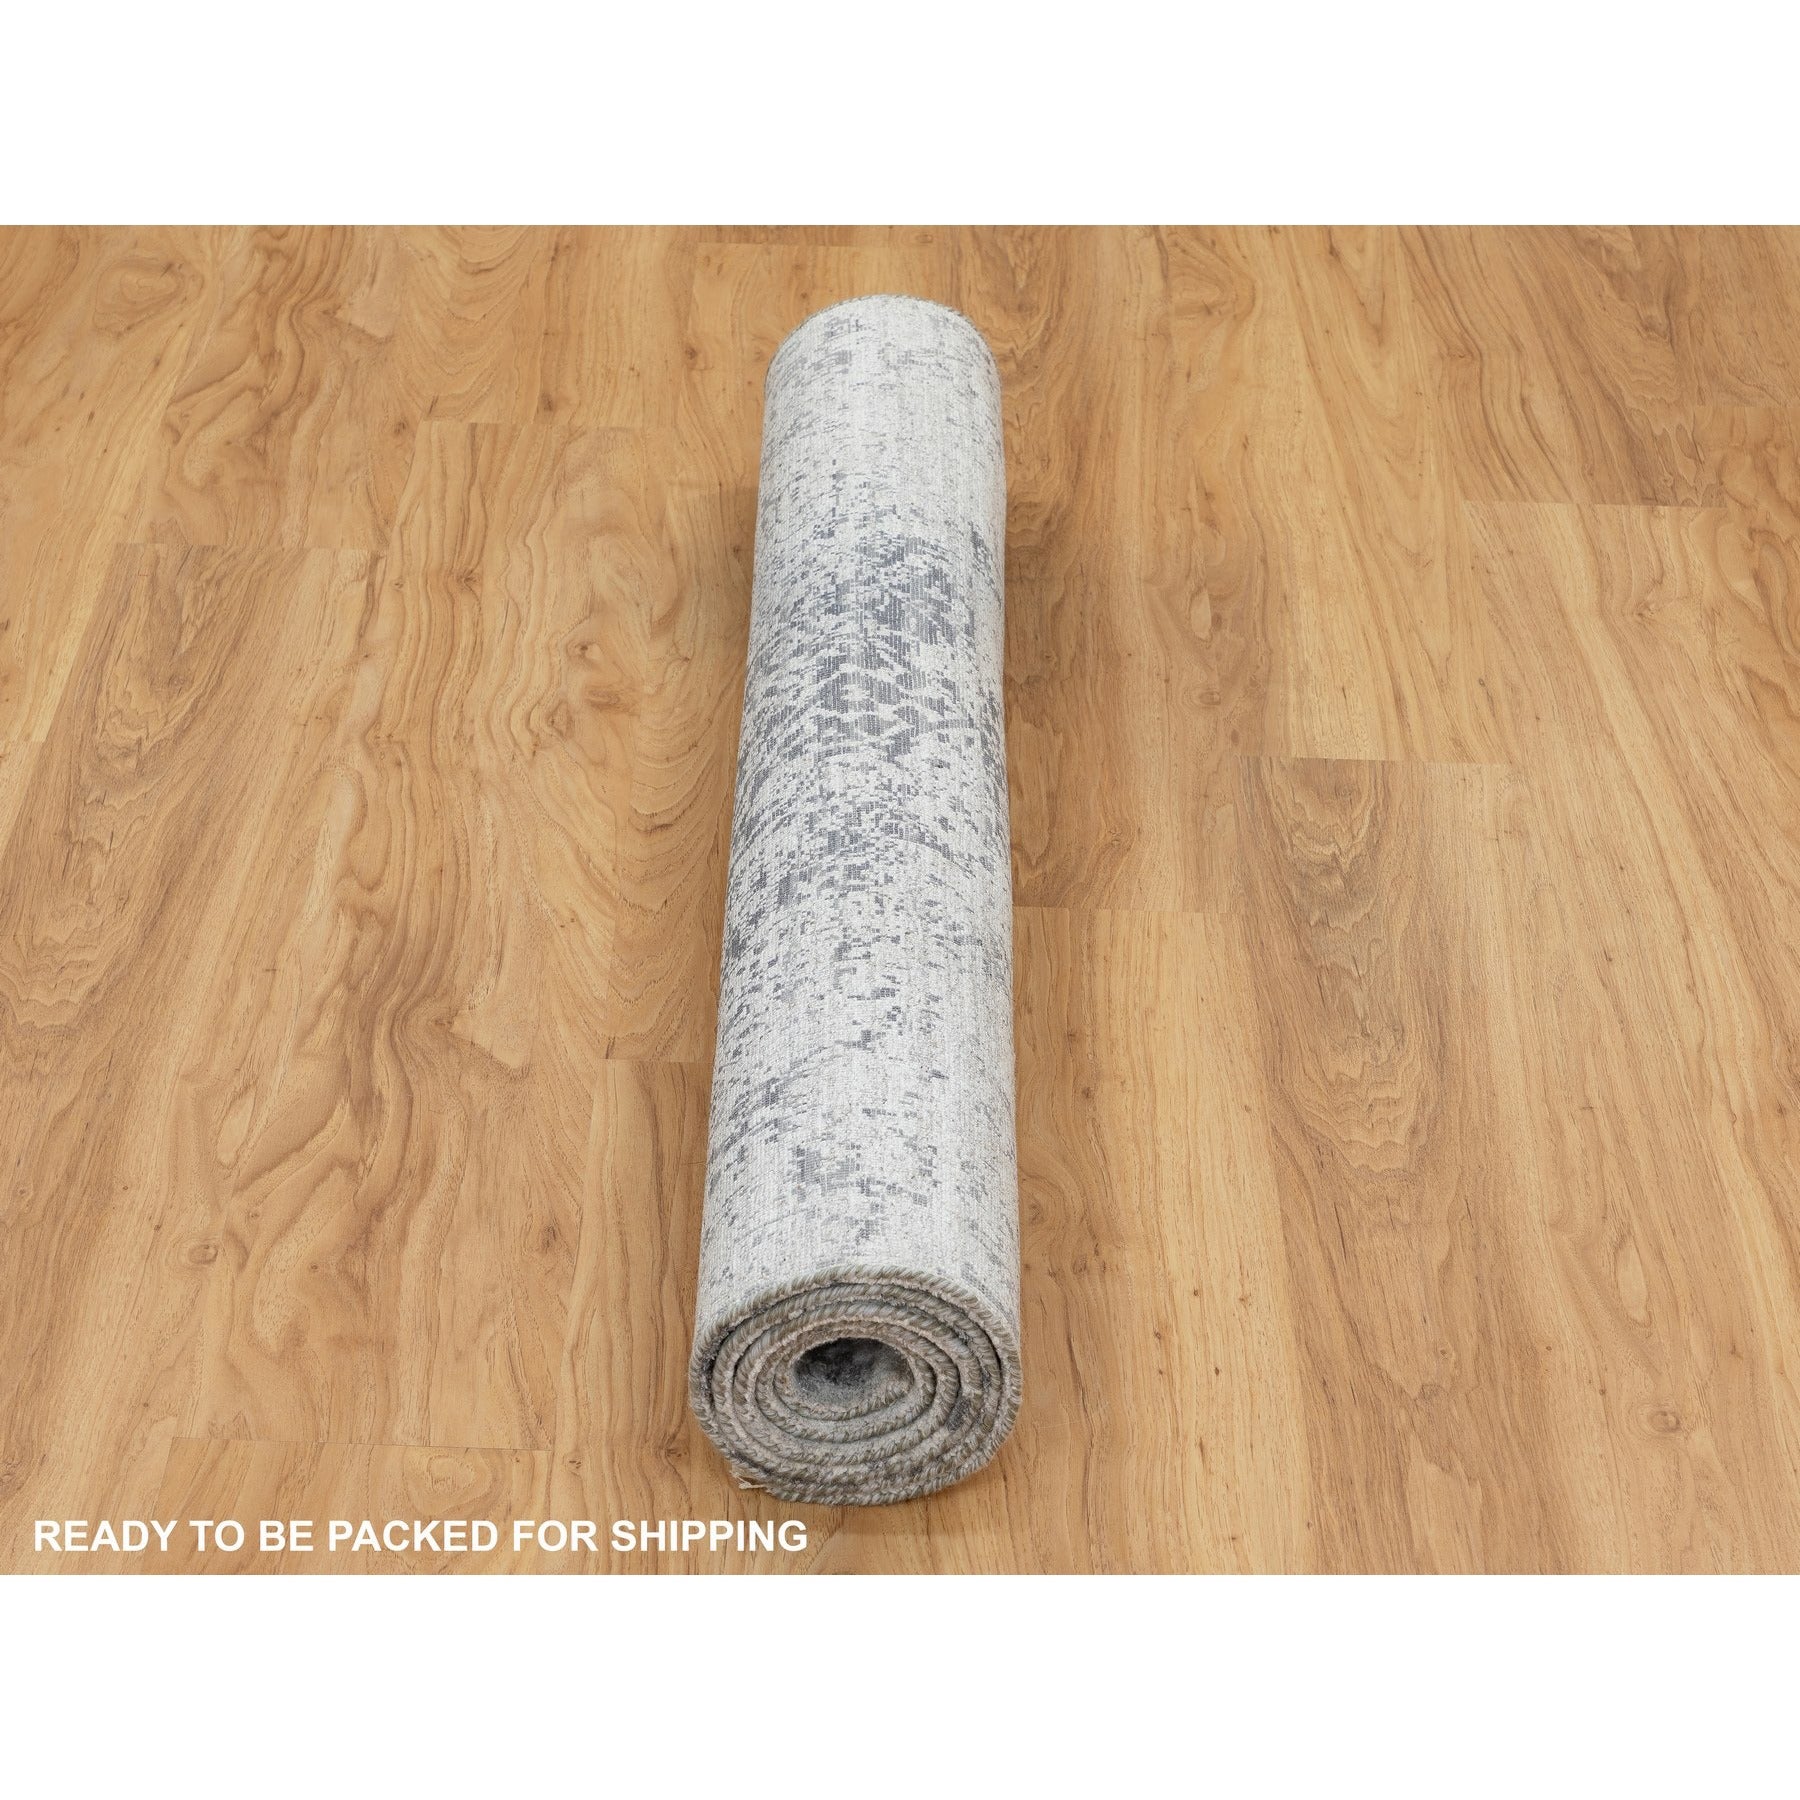 Hand Knotted Transitional Area Rug > Design# CCSR58553 > Size: 4'-1" x 6'-0"